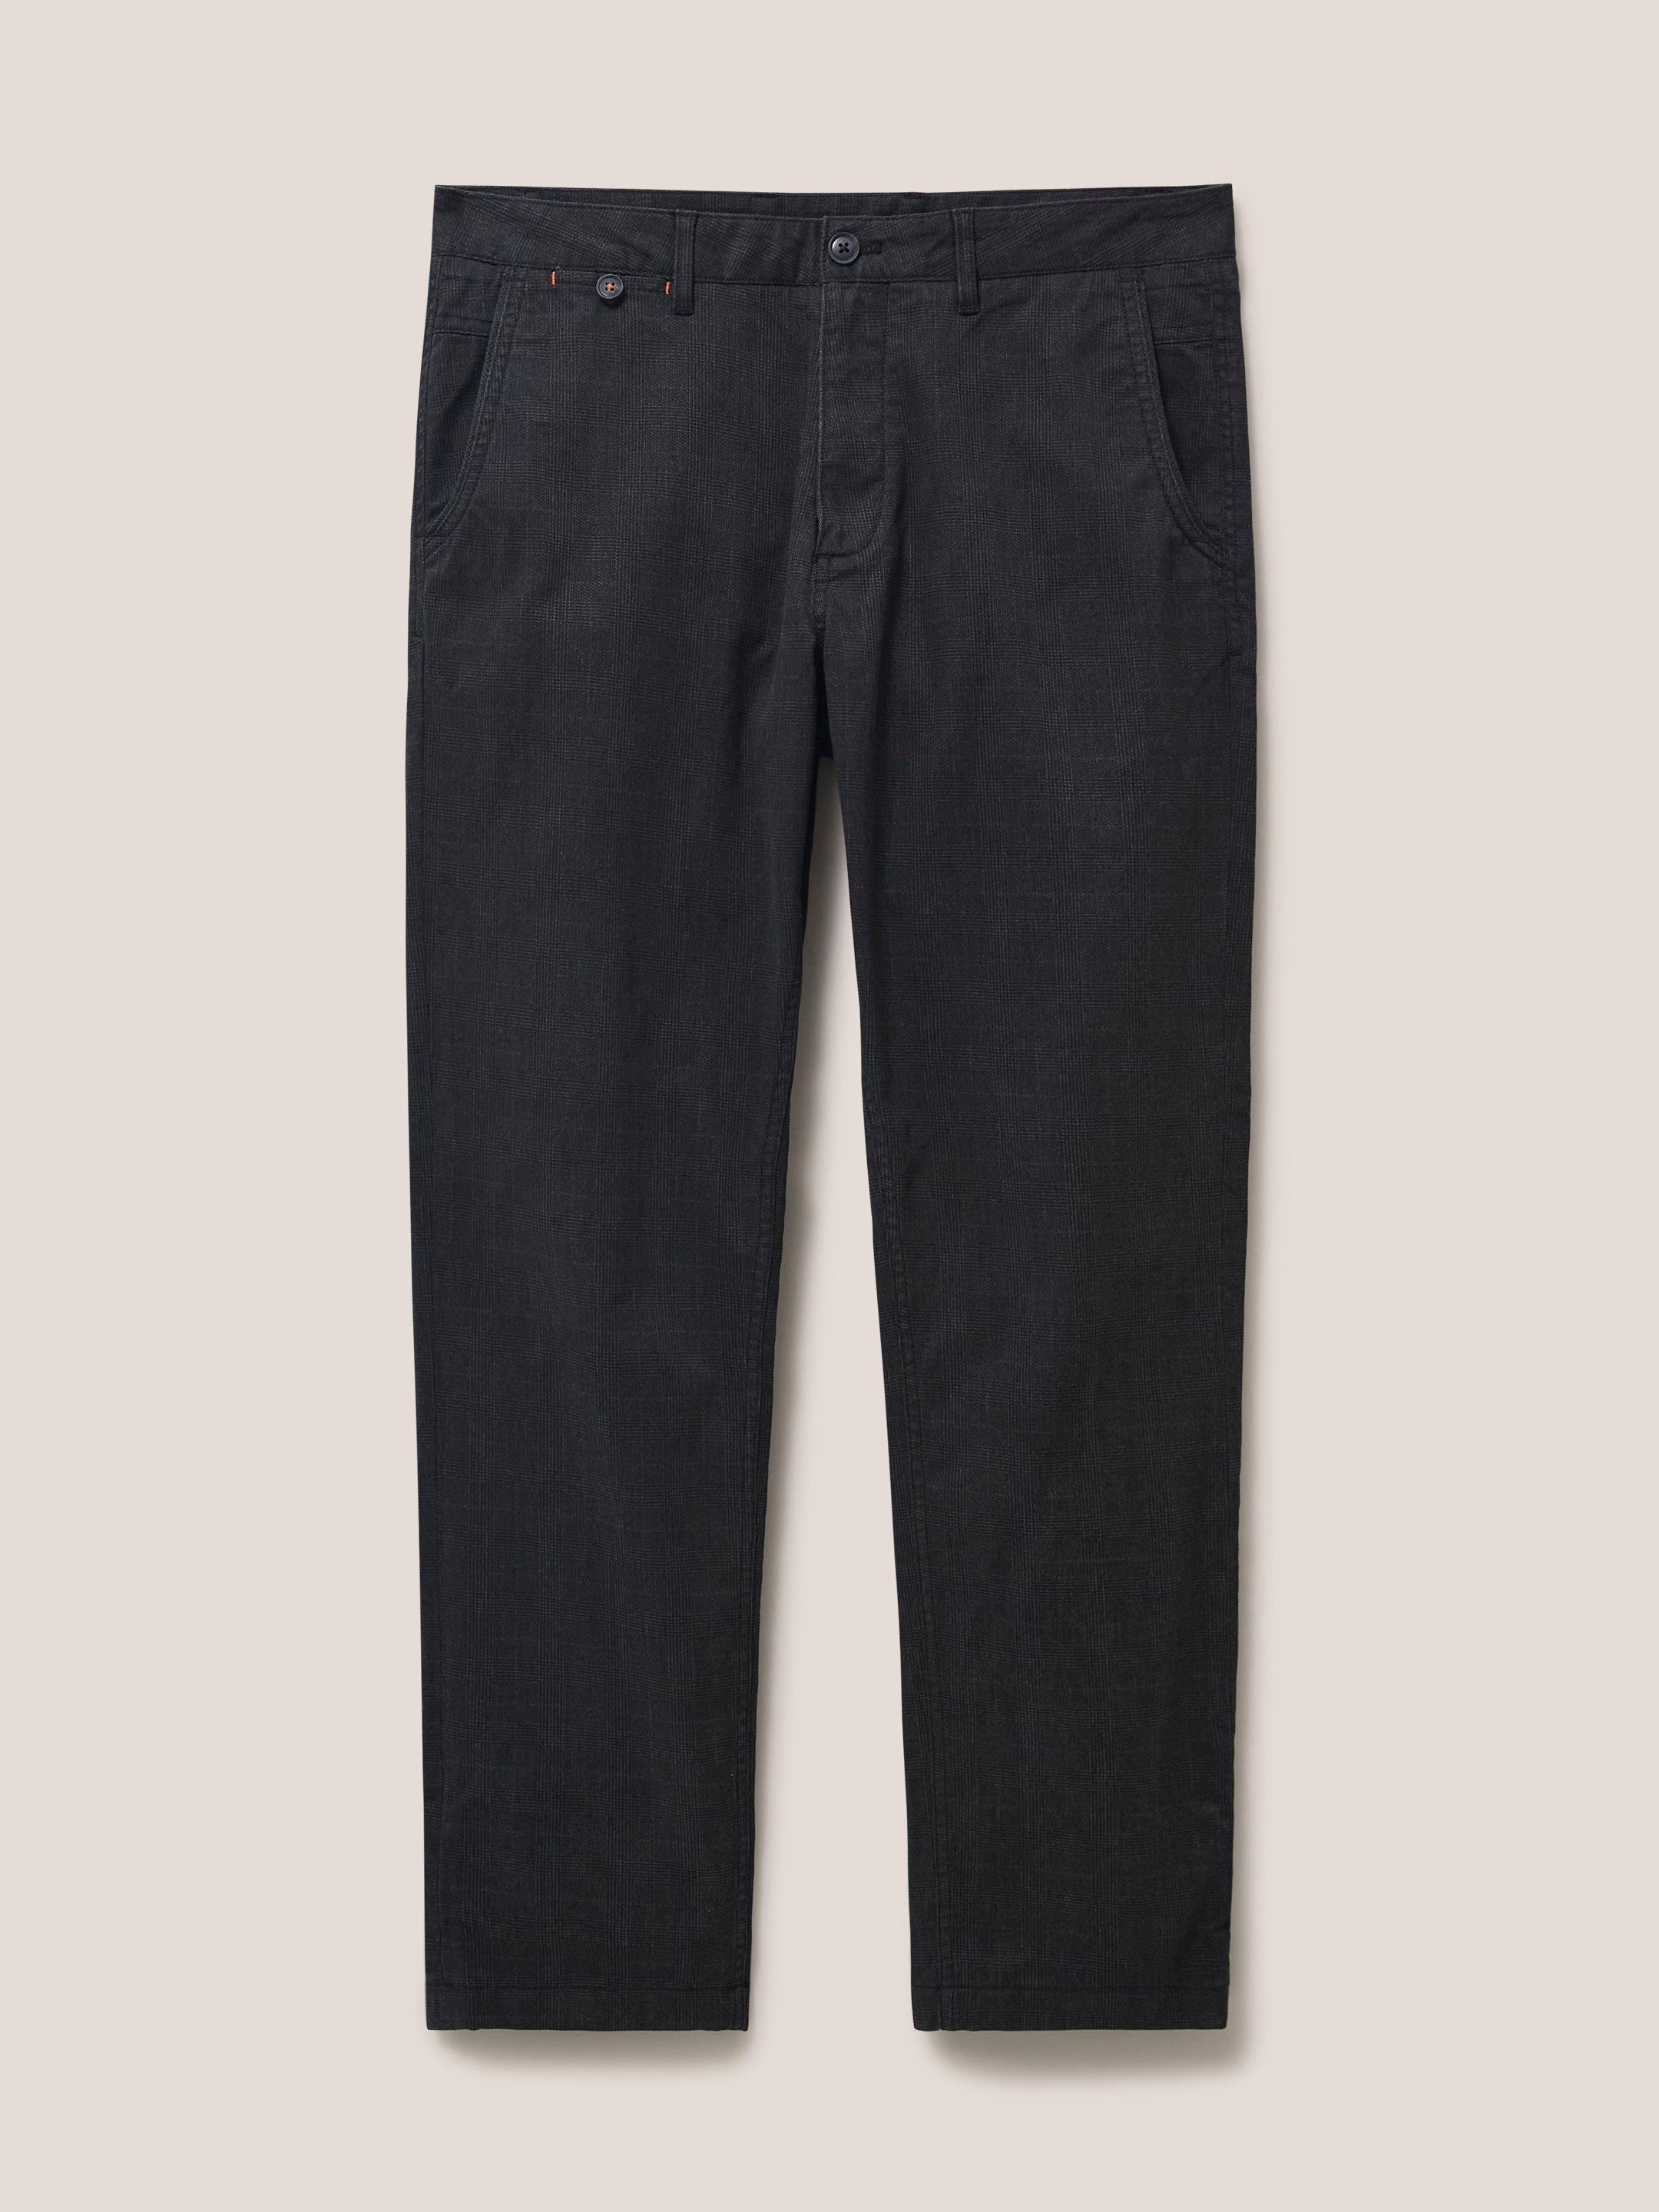 Smart Sutton Trouser in CHARC GREY - FLAT FRONT